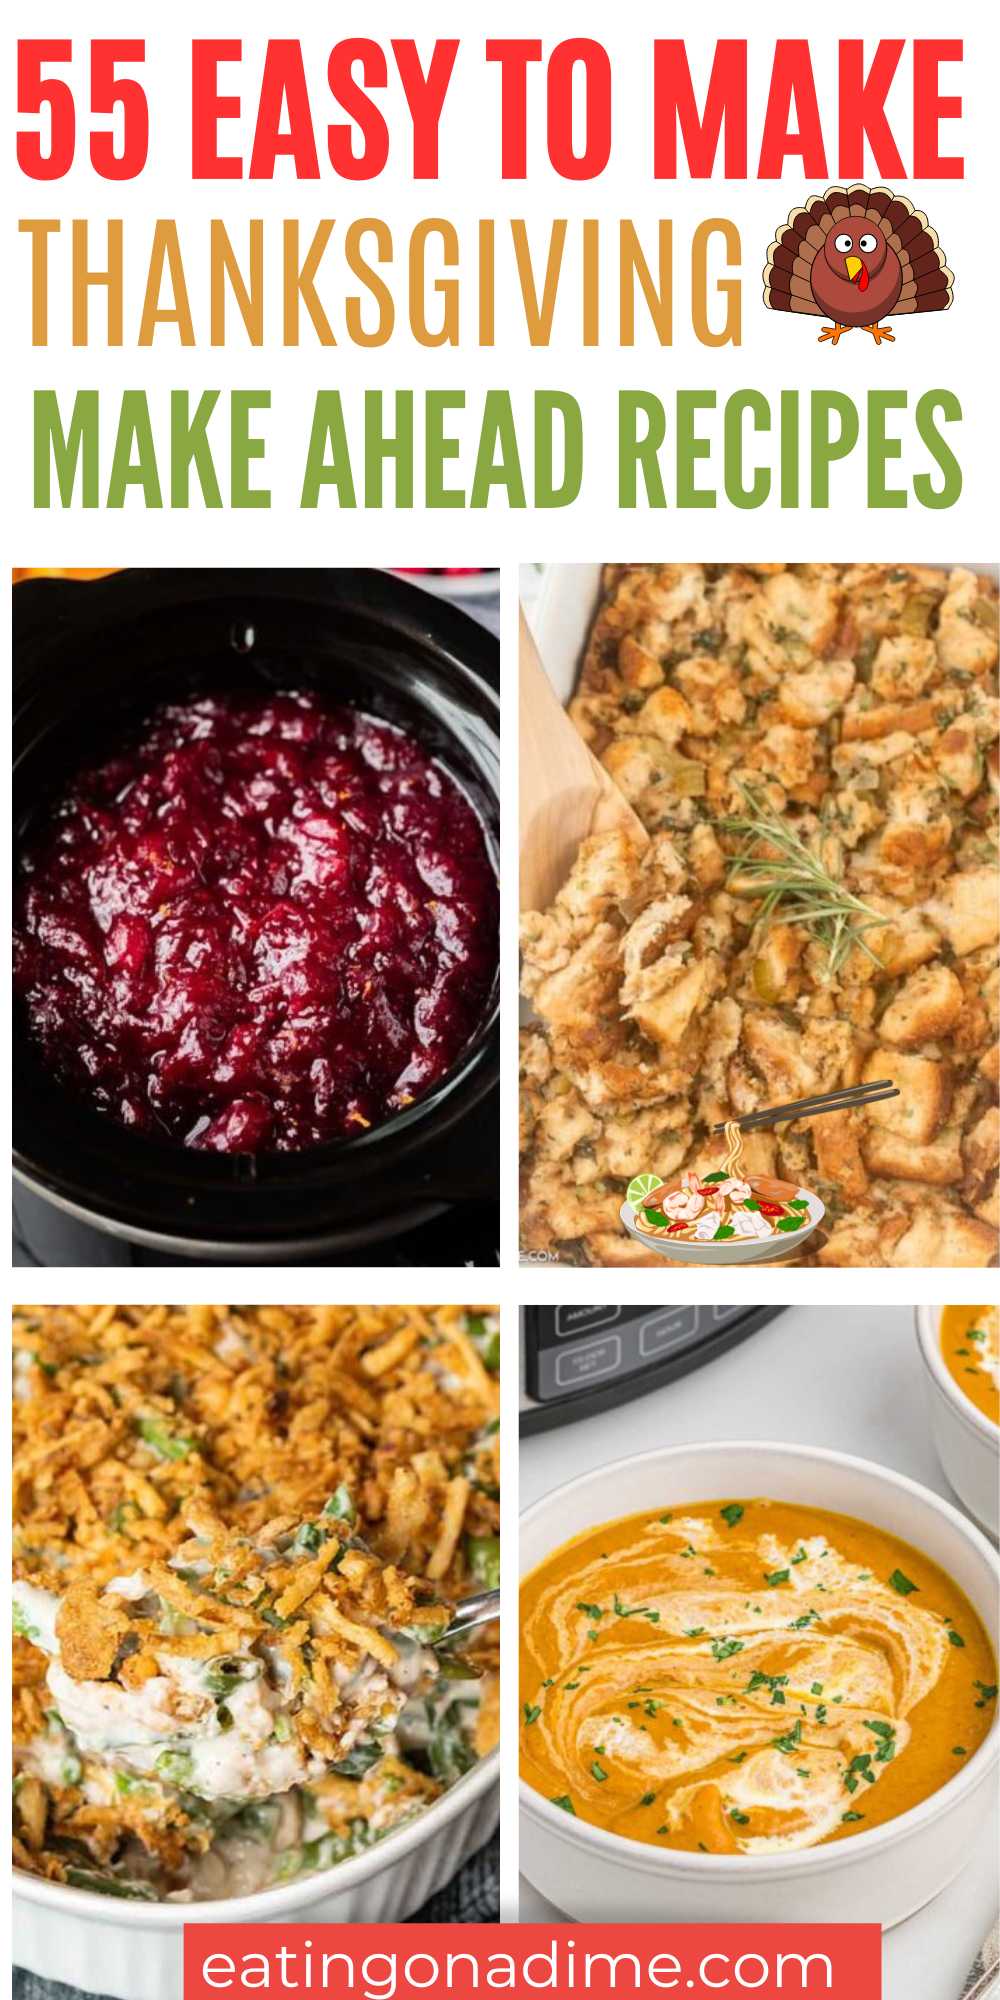 Save time and effort with these make-ahead Thanksgiving recipes. Learn how to make 55 of the best make-ahead dishes for Thanksgiving that are super tasty and easy. #eatingonadime #makeaheadthanksgivingrecipes #thanksgivingrecipes